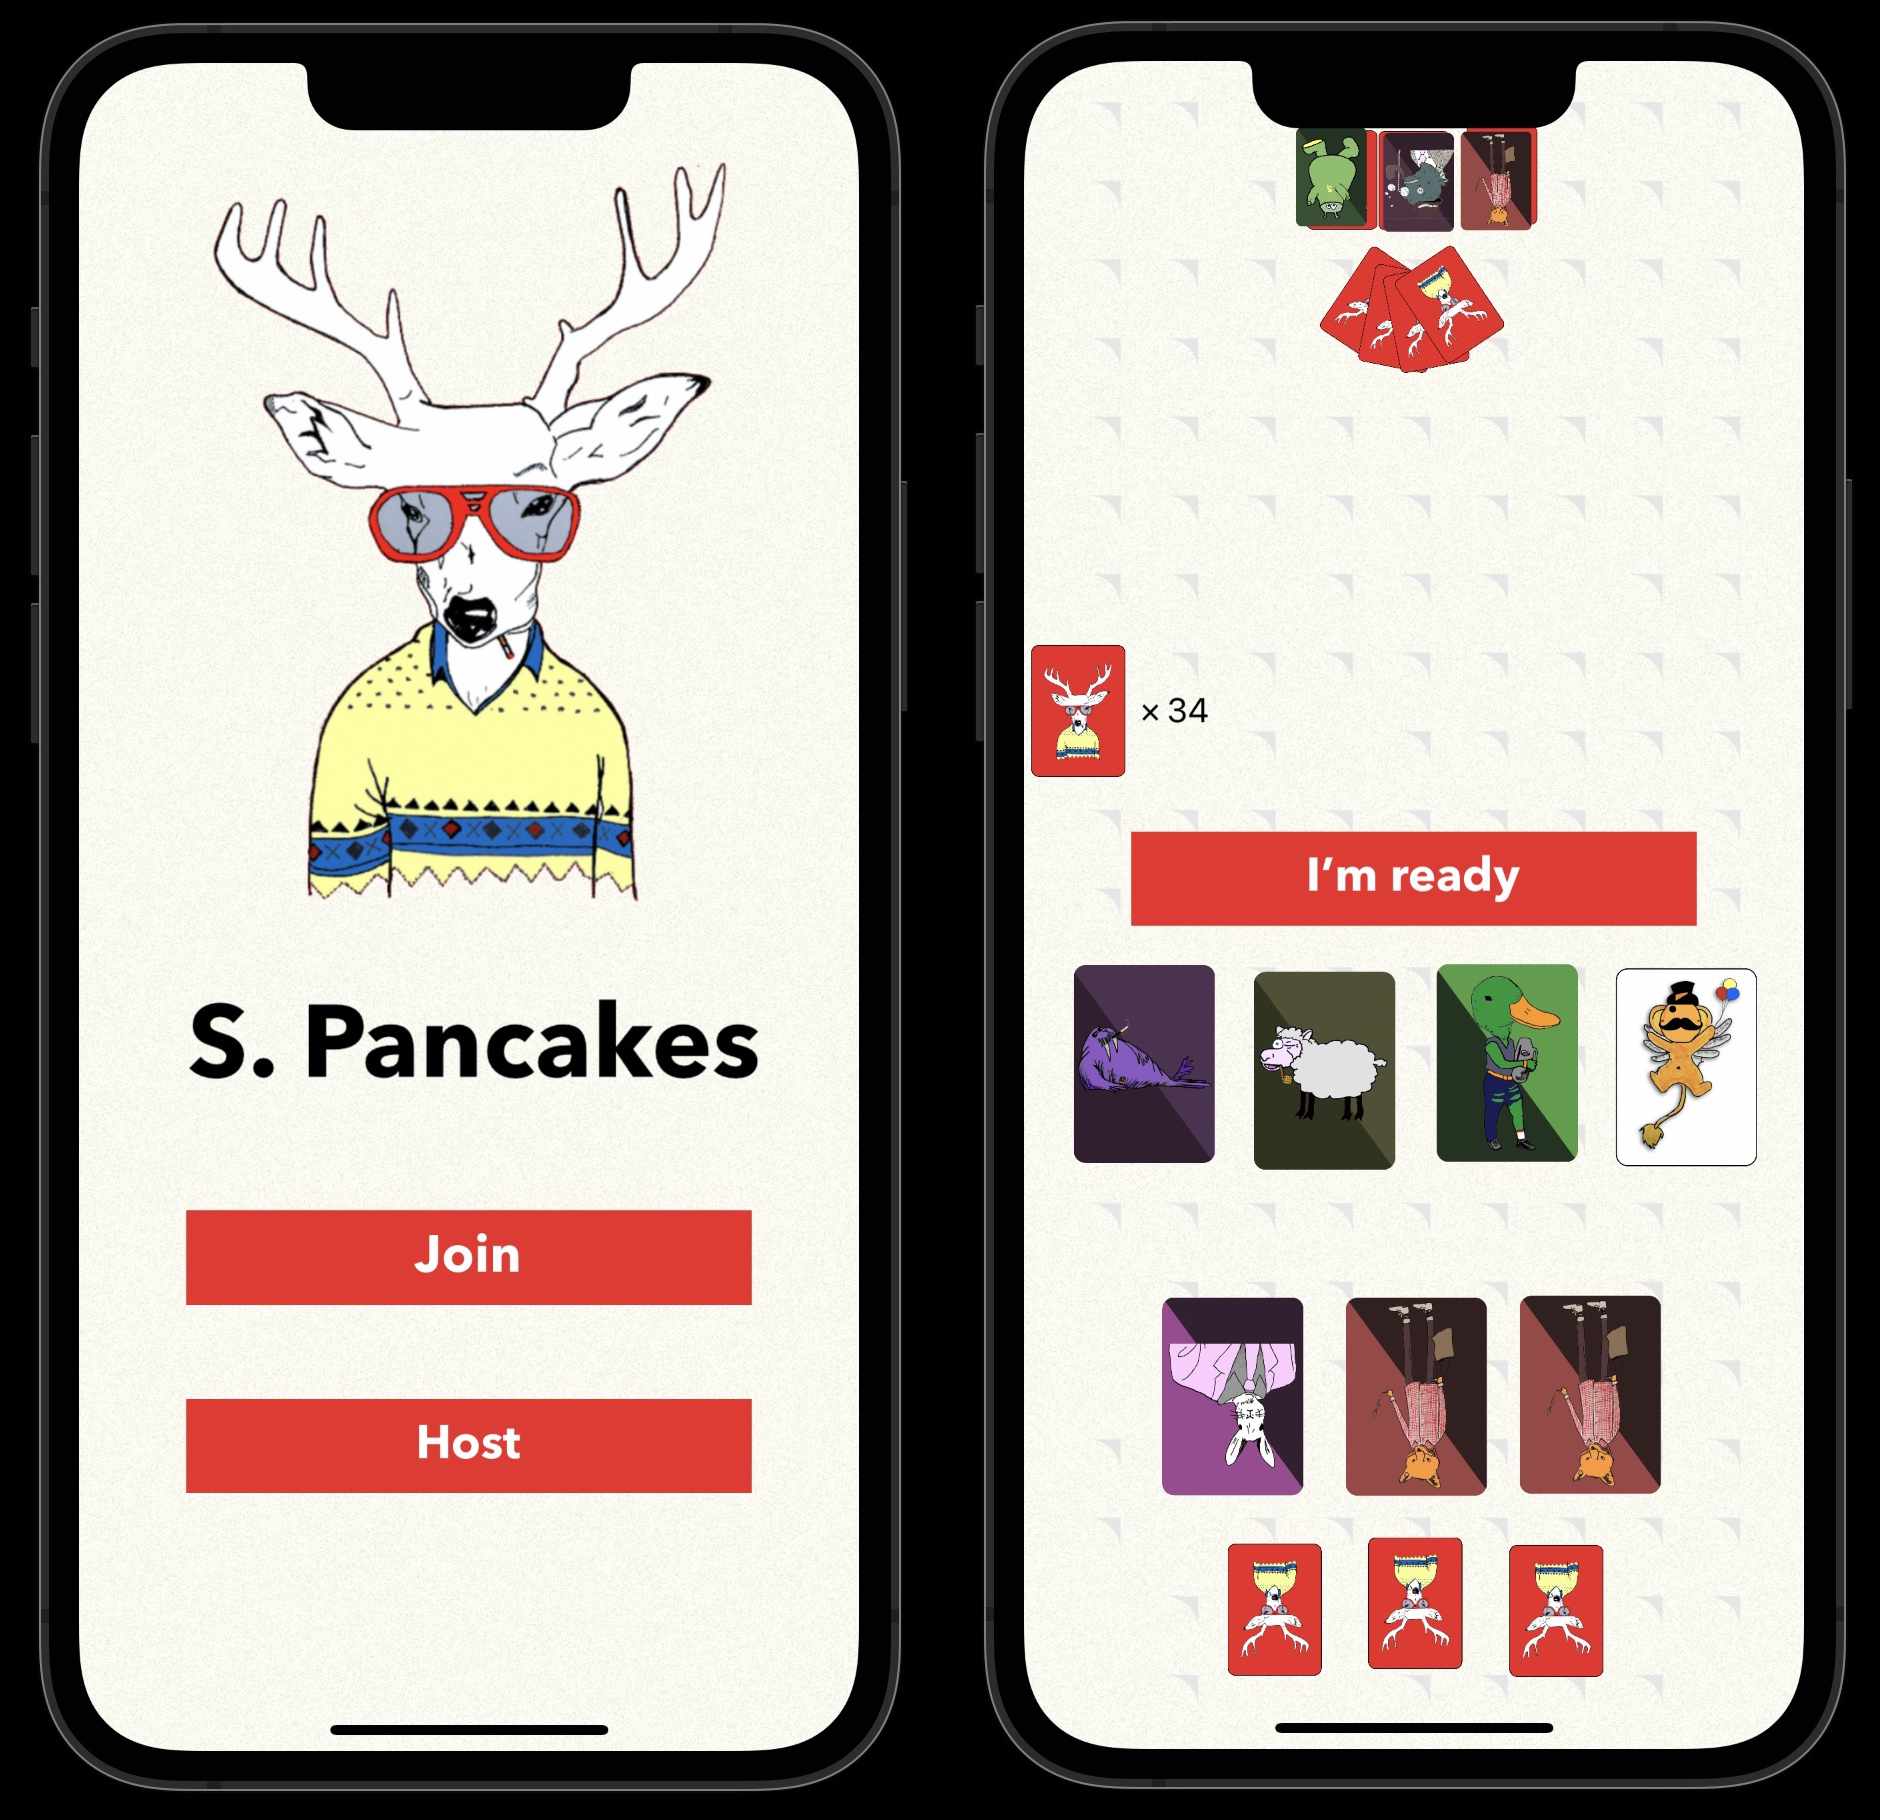 An image of two iPhone frames. The left one shows the home screen with a deer wearing a sweater and sunglasses, and "Join" and "Host" buttons. The right one show an in-progress game and several cards with colorful designs.